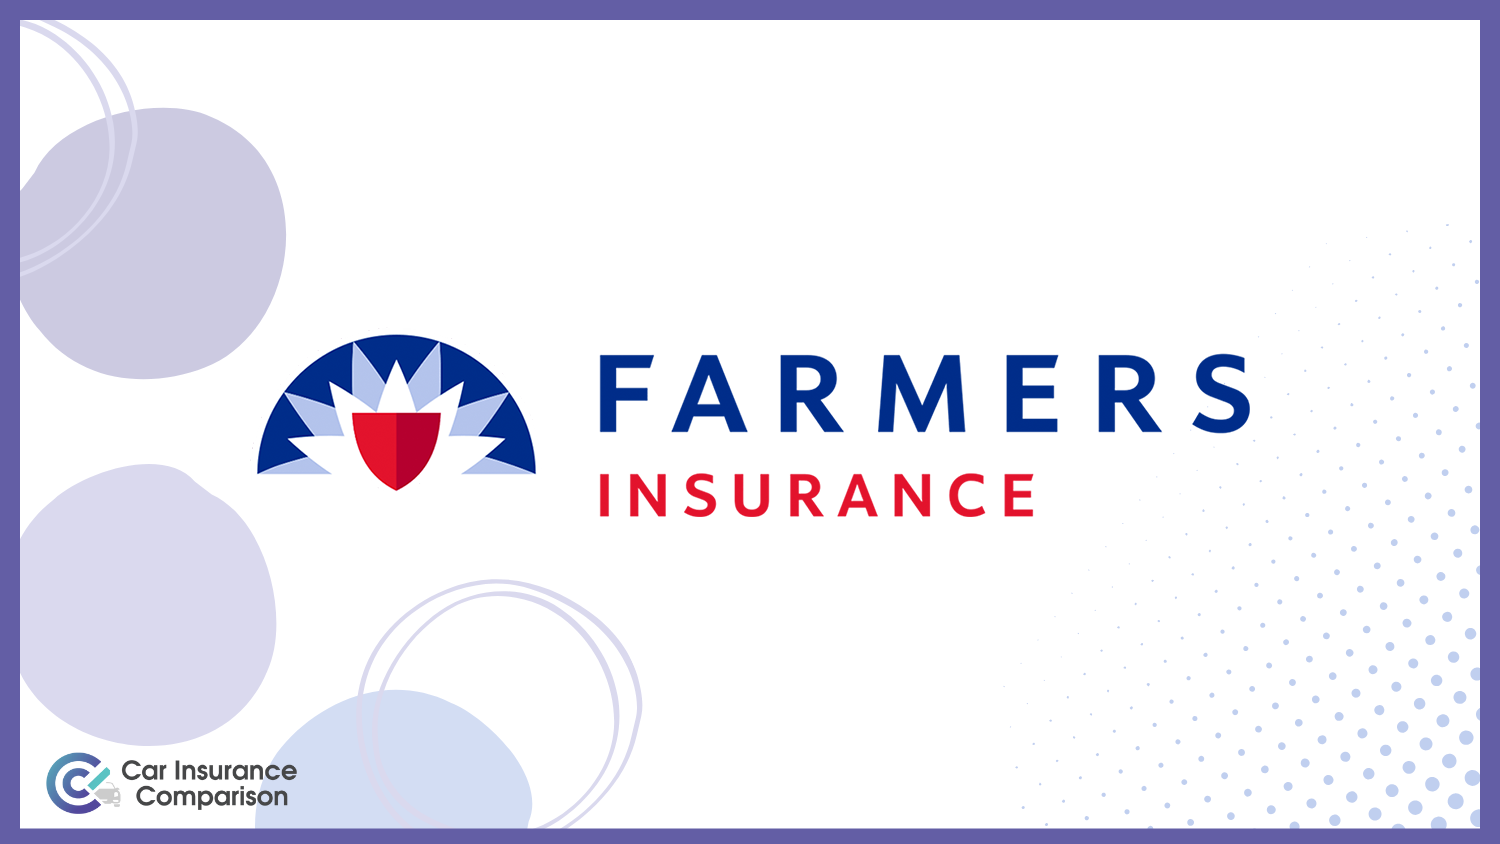 Farmers: Delivery Driver Car Insurance: Compare Rates, Discounts, & Requirements